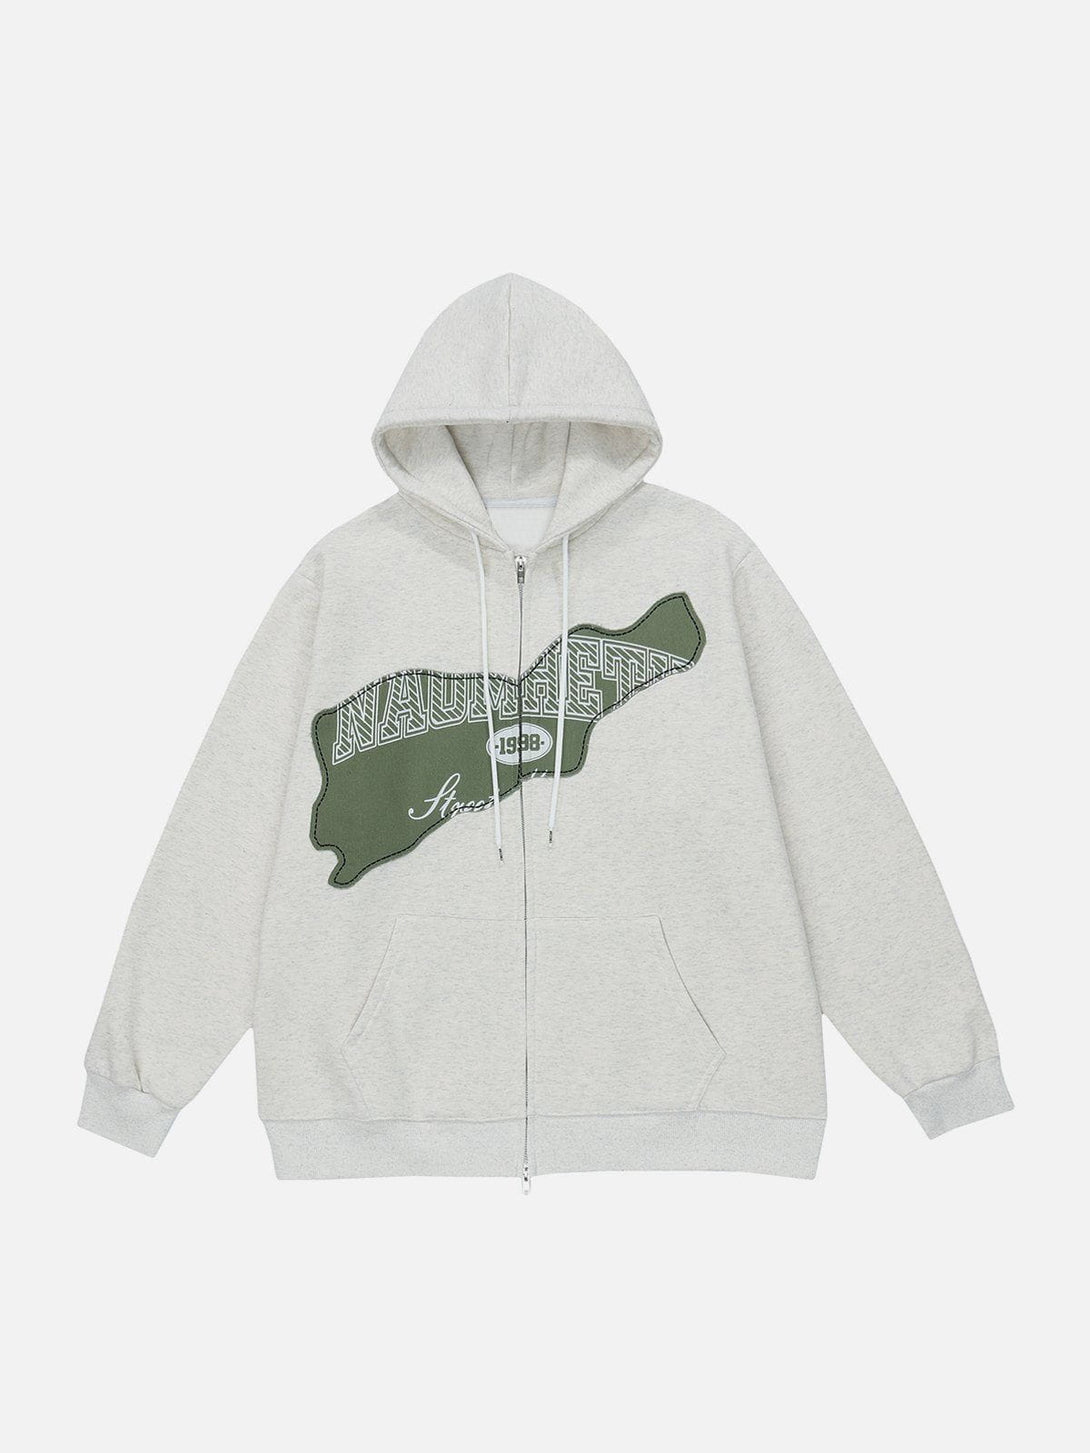 Levefly - Patchwork Letter Print Hoodie - Streetwear Fashion - levefly.com